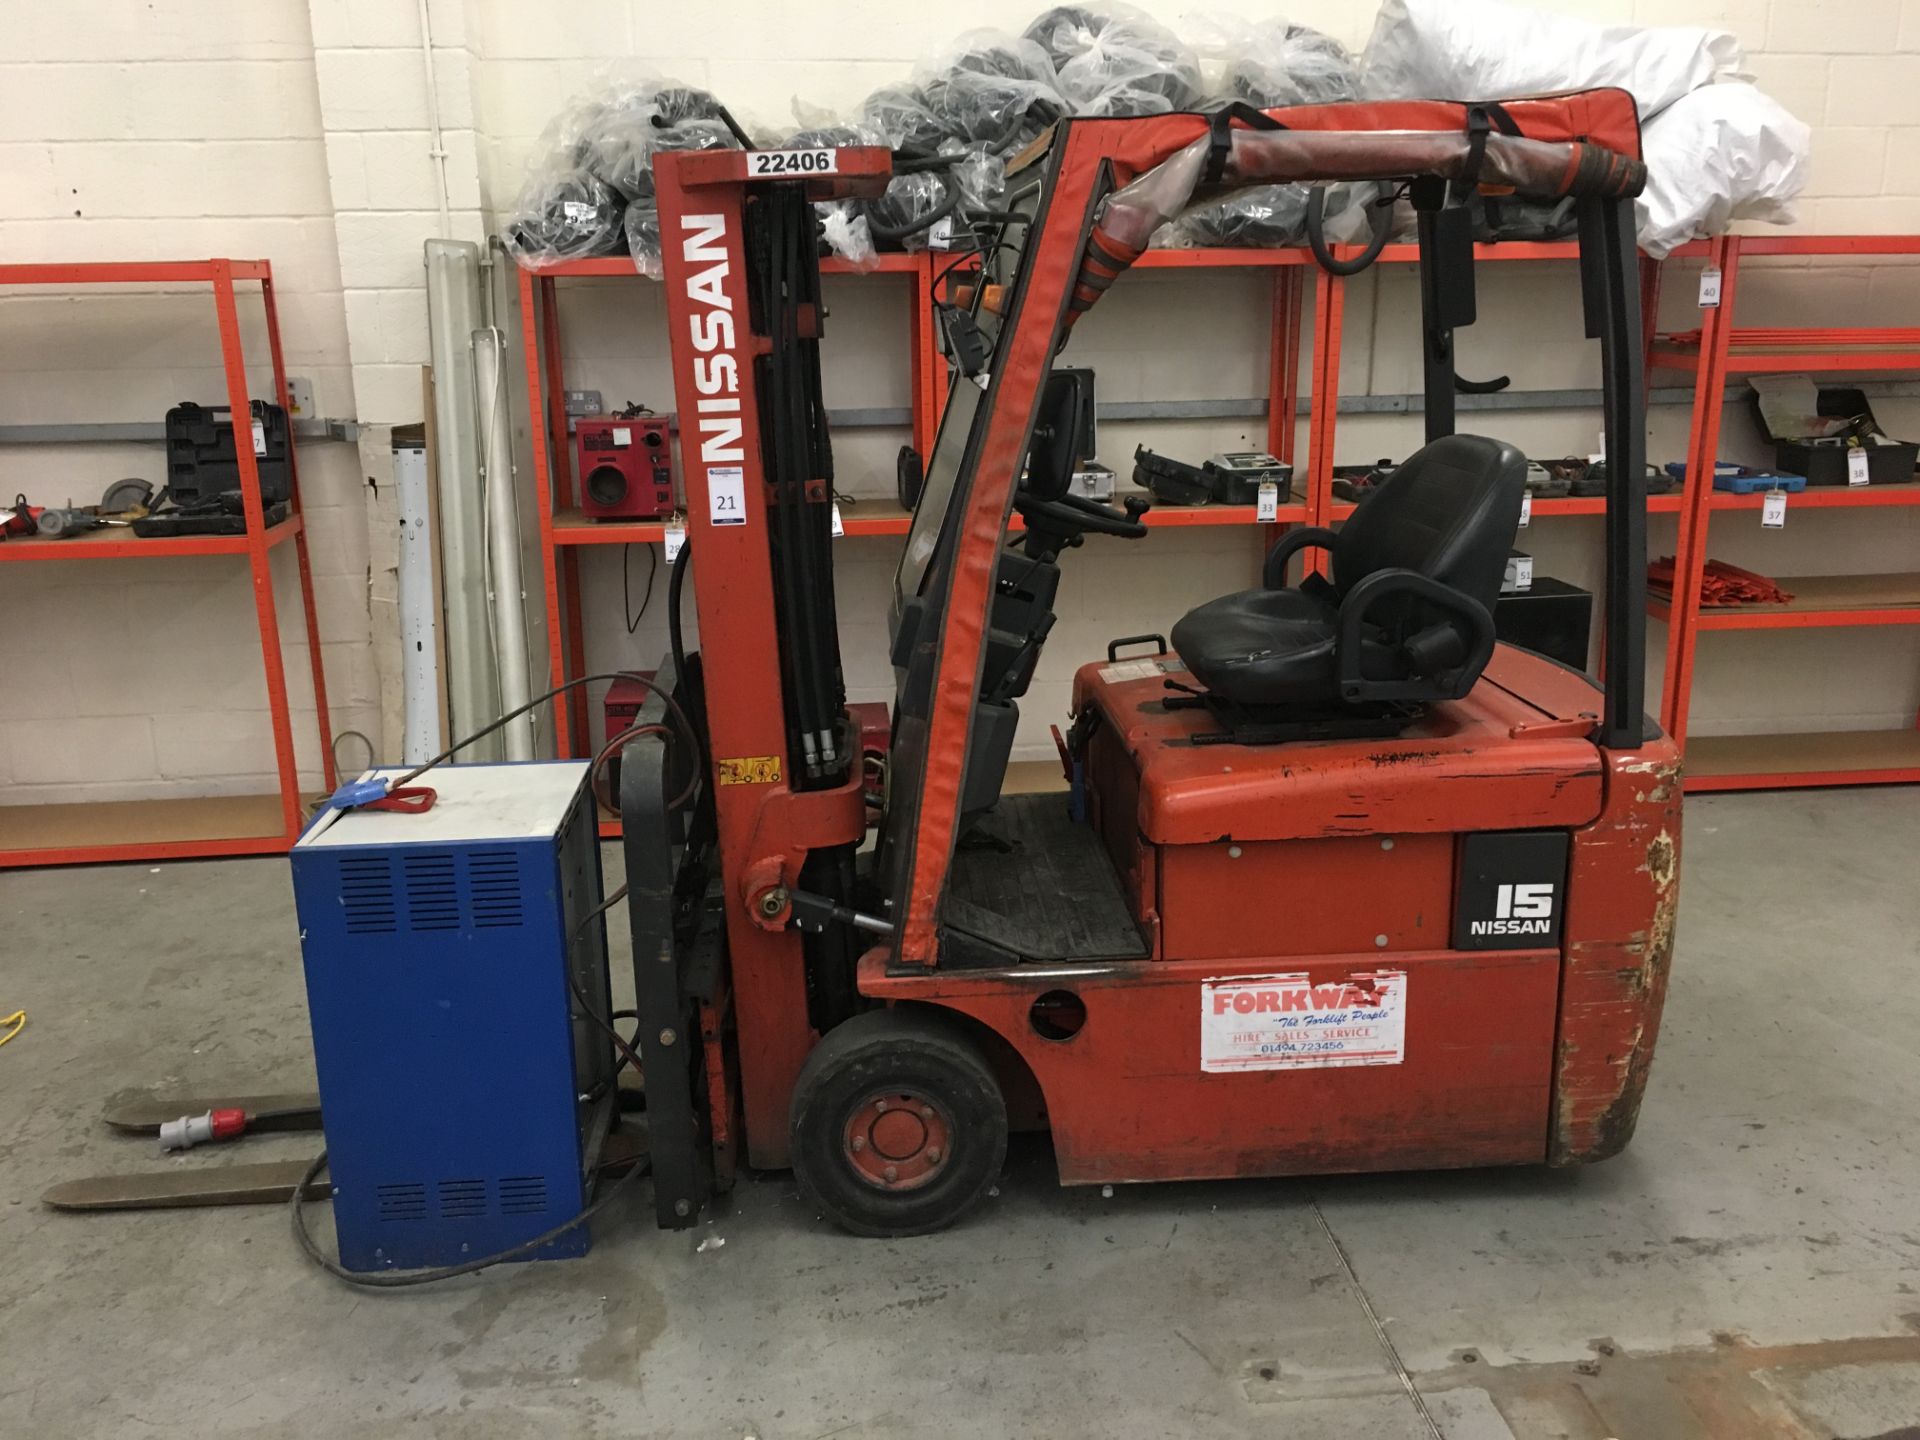 Nissan NO1L15HQ Sideshift Electric Forklift Truck, chassis number: E720836 with Charger (Please Note - Image 2 of 4